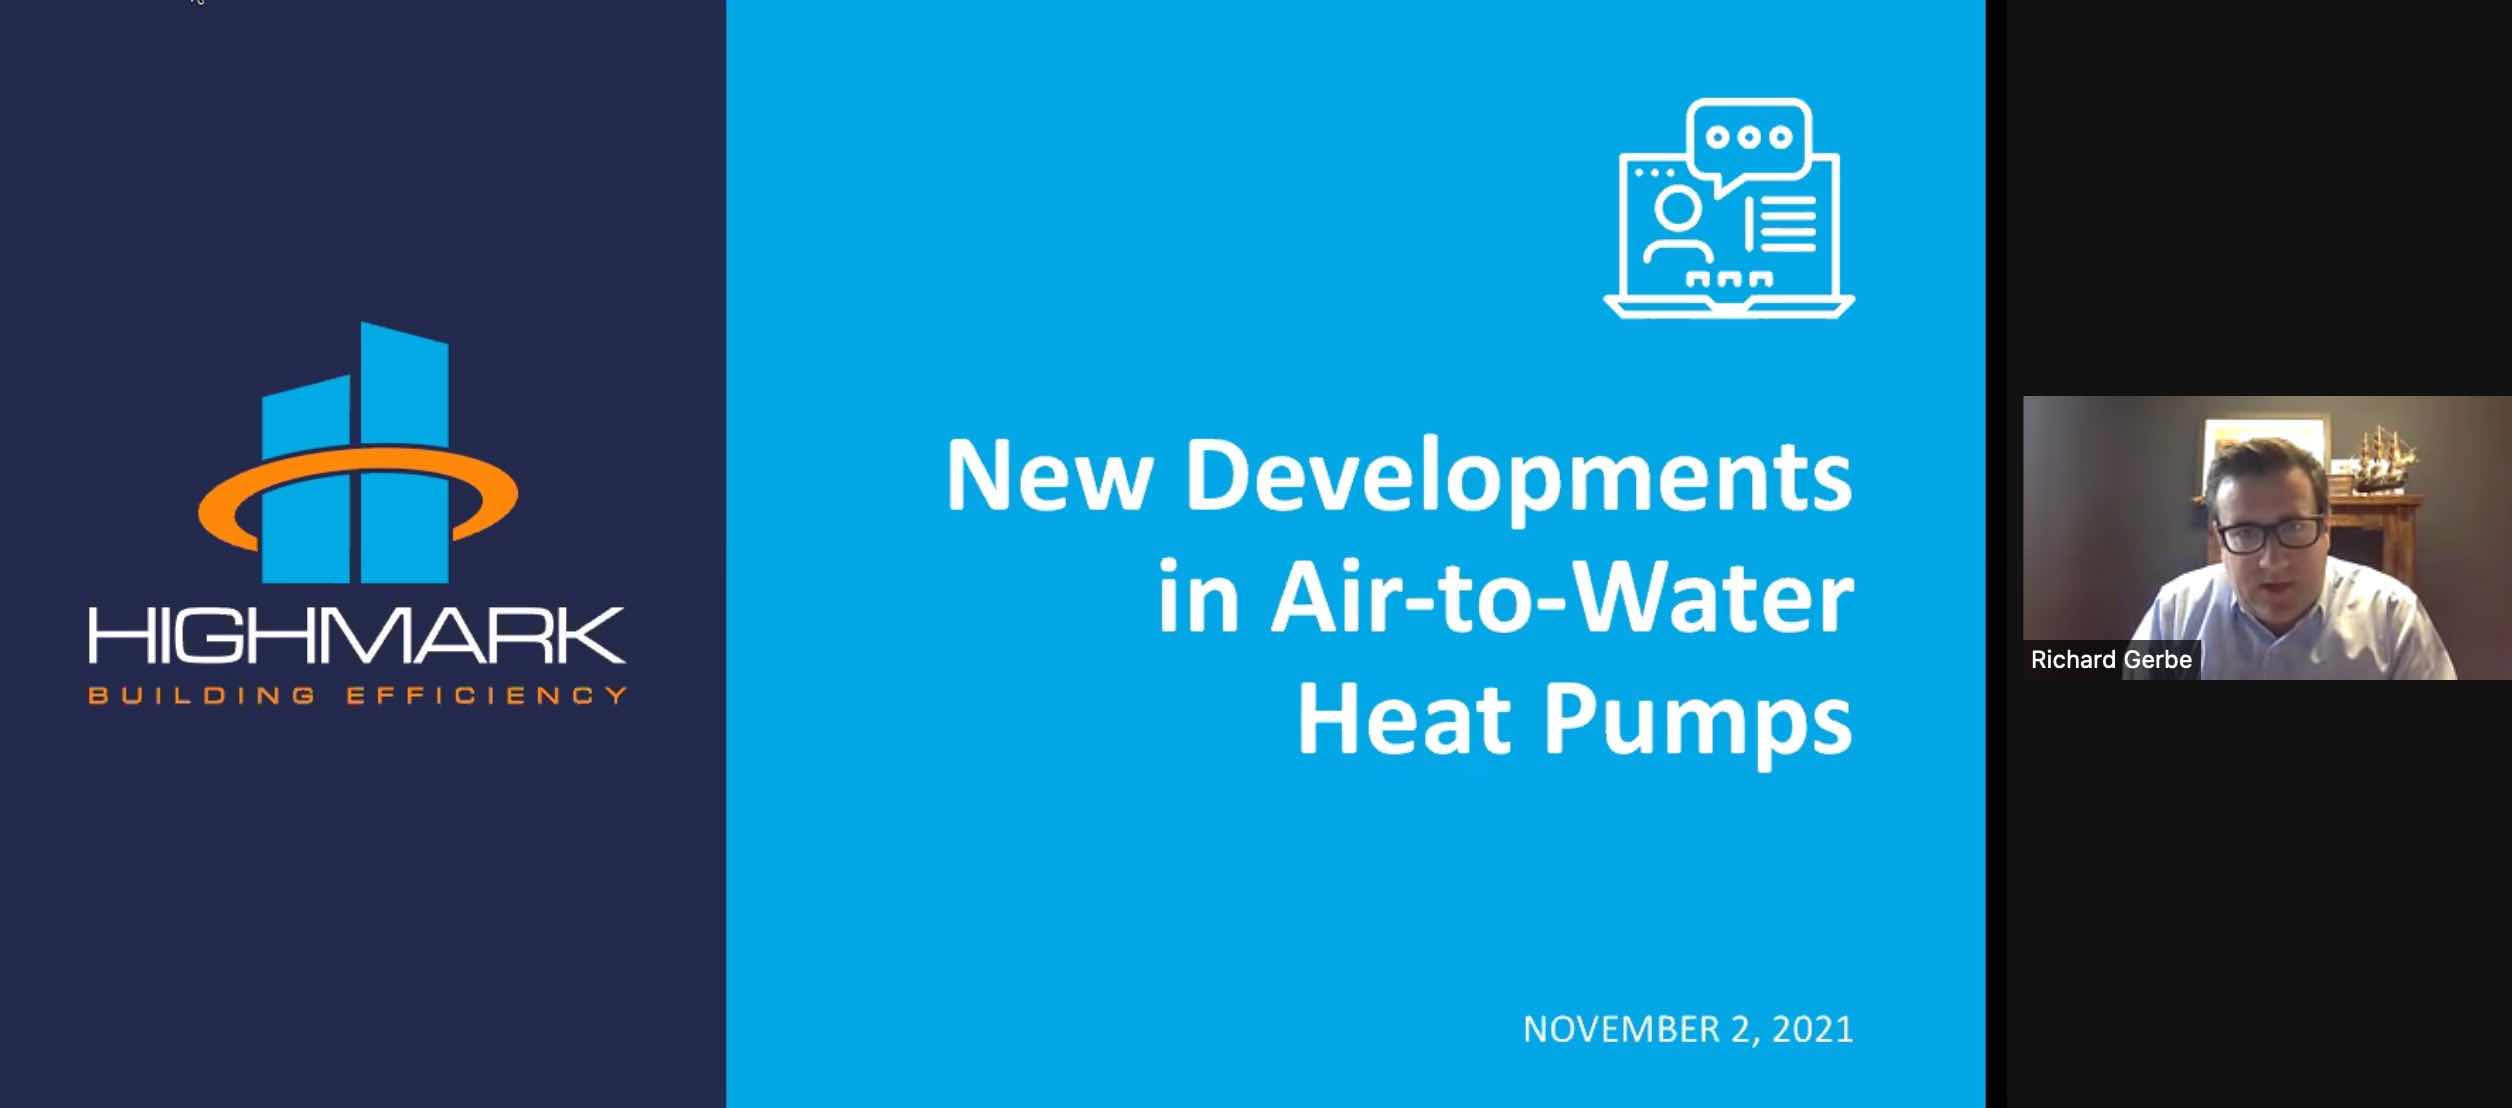 Air-to-Water Heat Pumps - NY-GEO